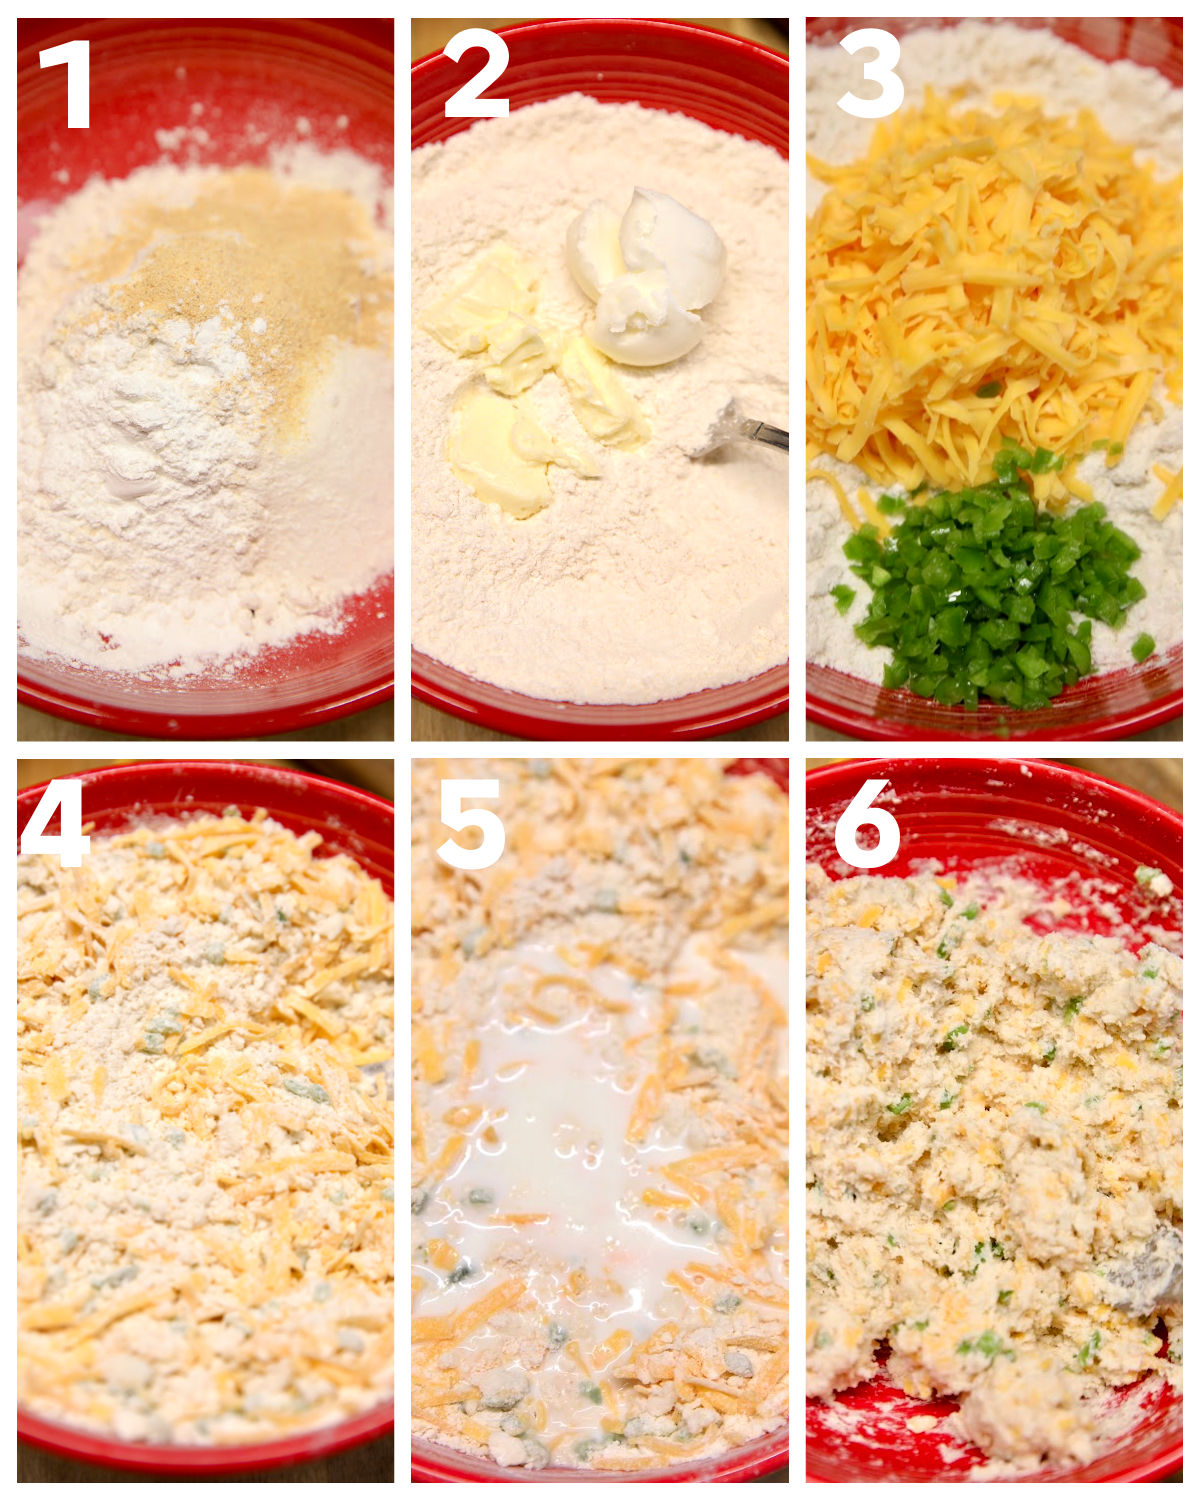 Step by step making jalapeno cheddar biscuit dough.